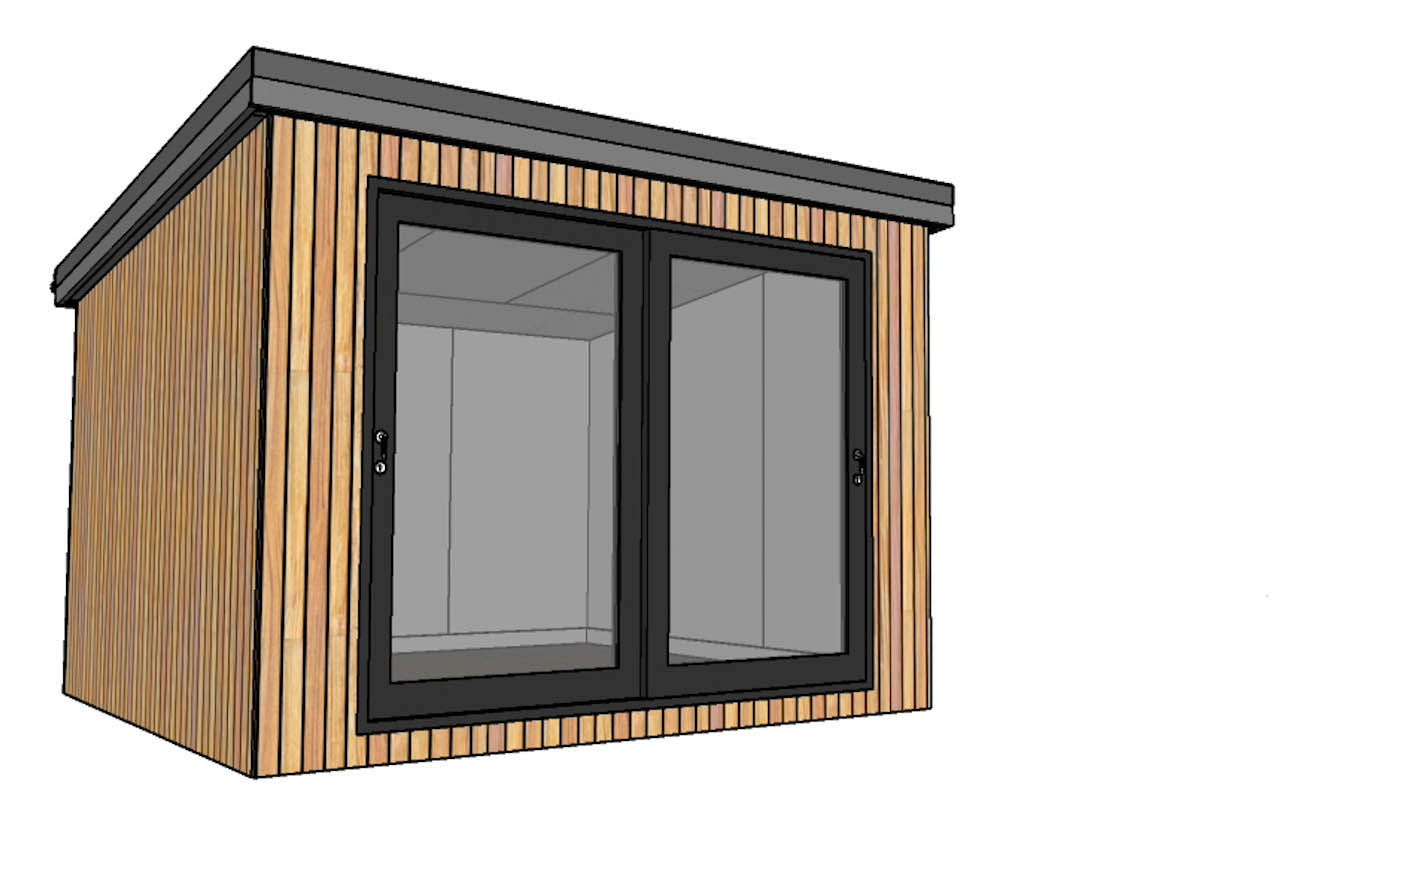 A 3D garden room model gives us much more detail than our sketch